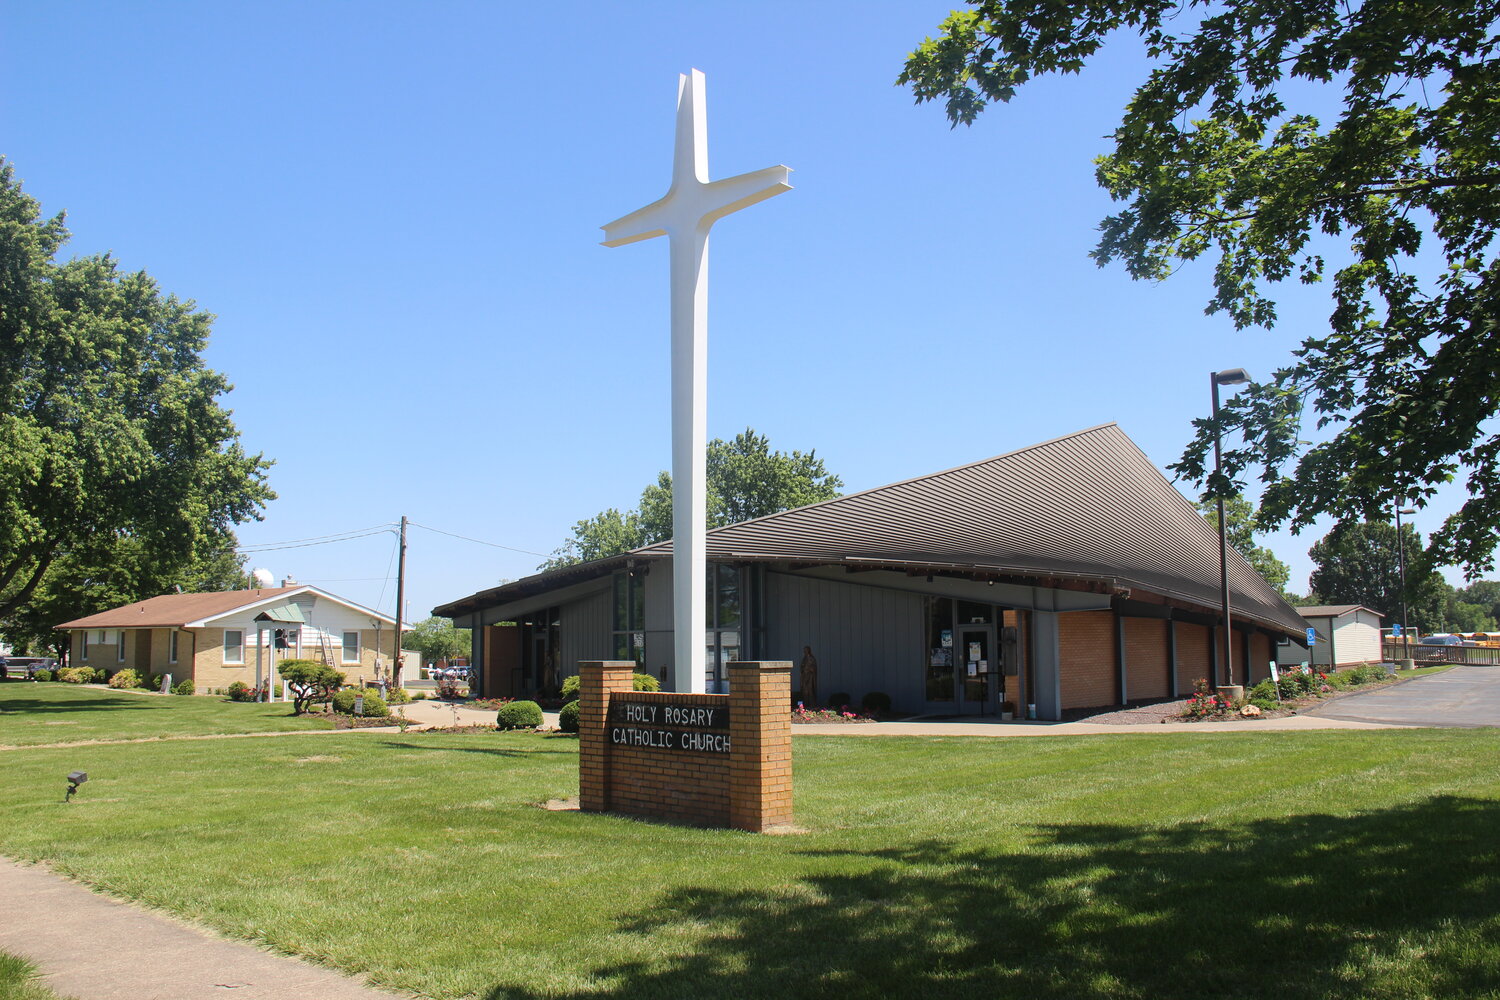 A new priest will take over at Holy Rosary Church in Warrenton.